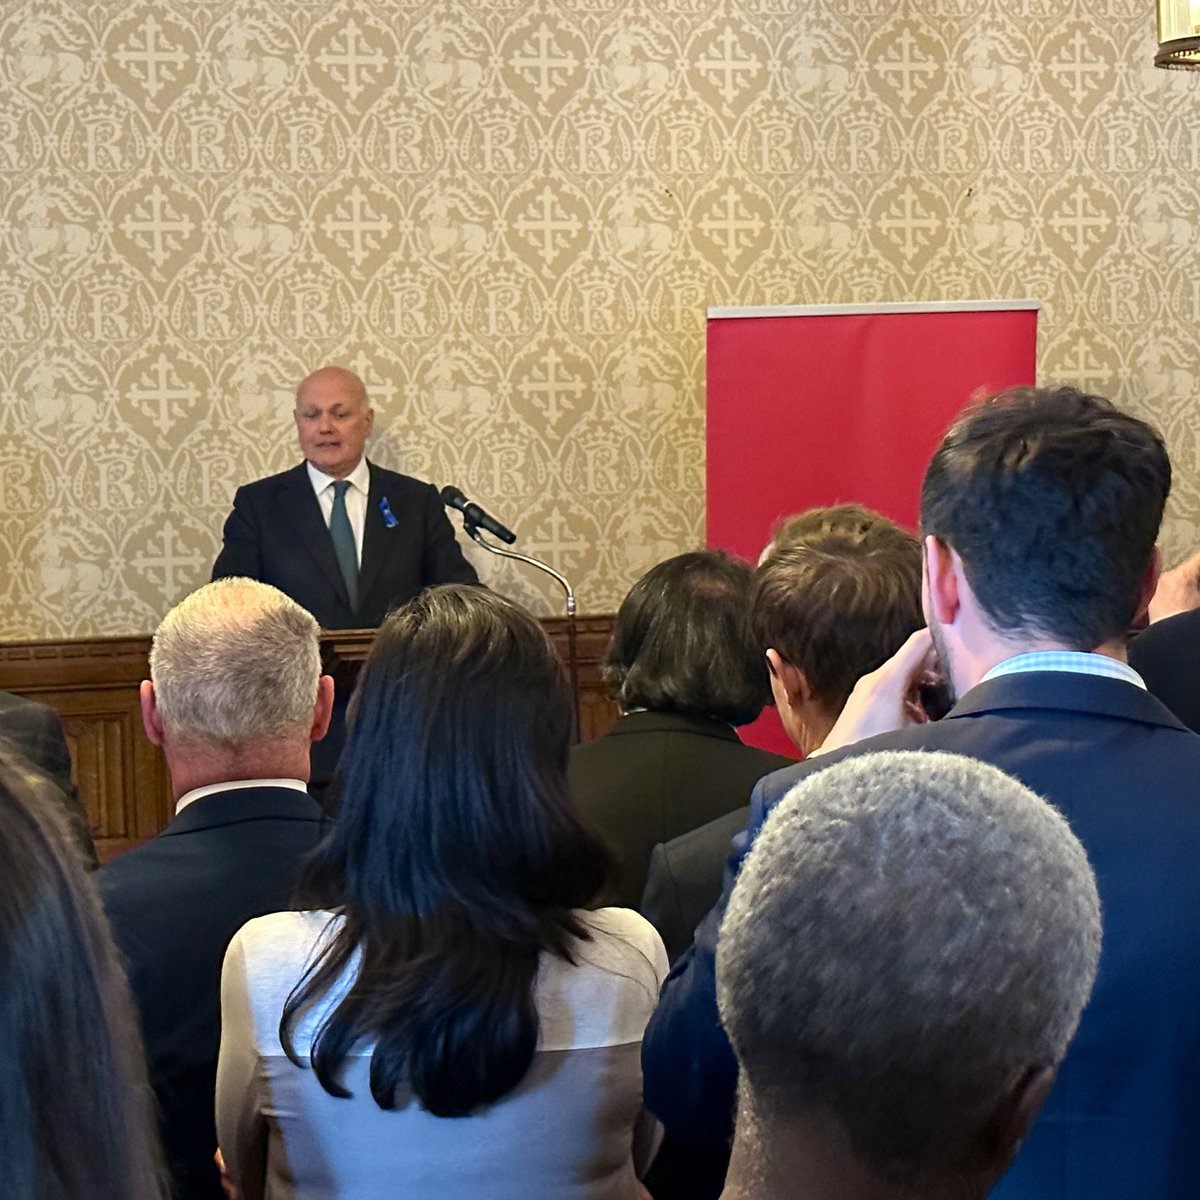 An insightful evening @UKHouseofLords for the cross party event on “Universal Credit event - a decade of transforming welfare” hosted by @policy_practice and @centre and @csjthinktank. Great to hear from @MPIainDS, @GuyOppermanMP & @JonAshworth and looking forward to big things